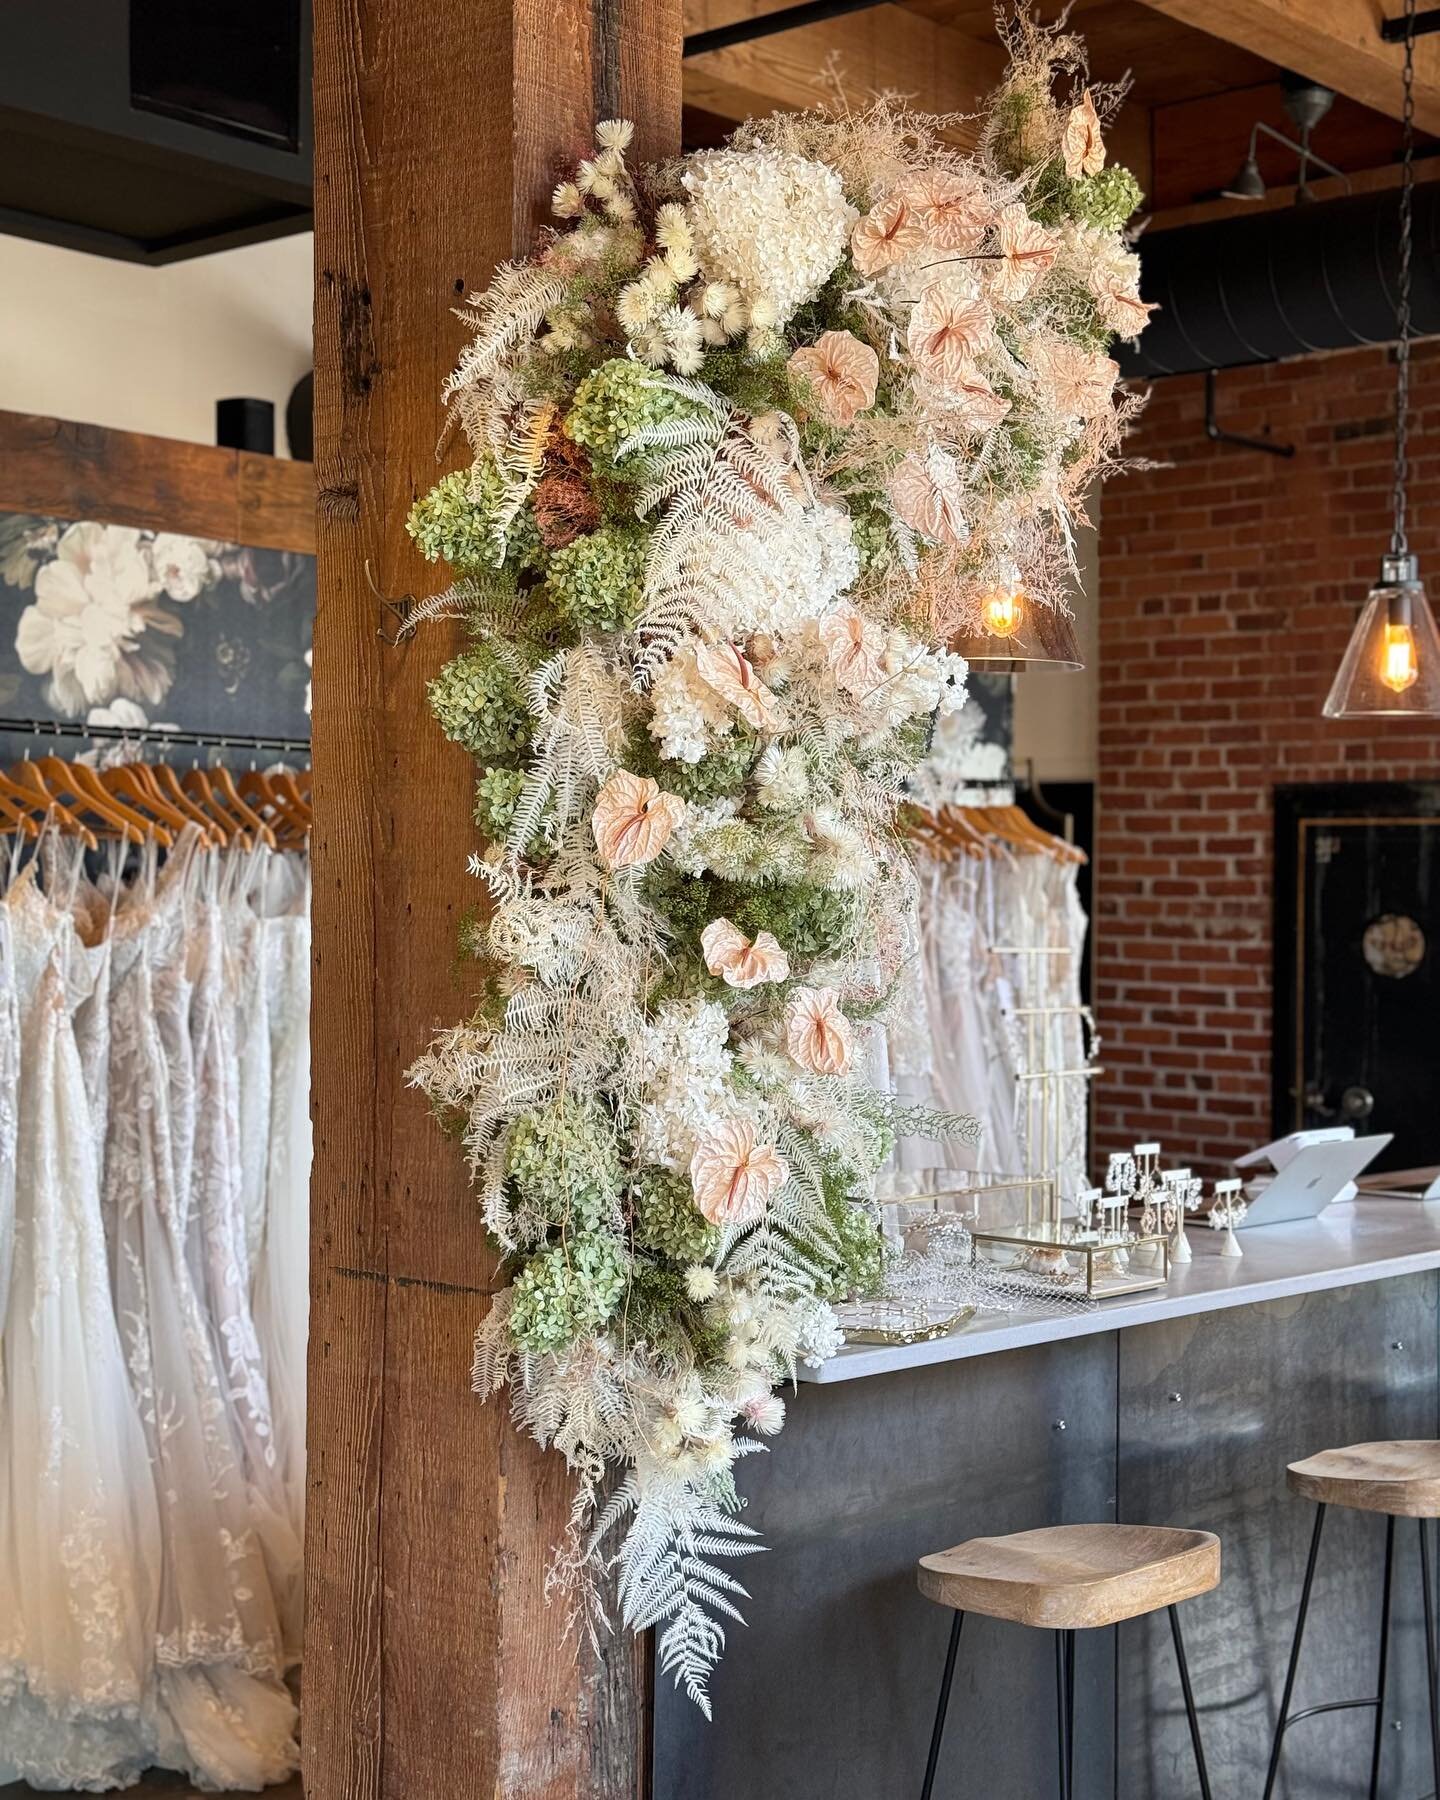 We&rsquo;re obsessed with our new floral installation by @idlewildfloral! Bringing new life into the shop as we head into our Spring appointments! ✨🌸

#bridalshop #californiabride #driedflorals #weddingflorals #bridalboutique